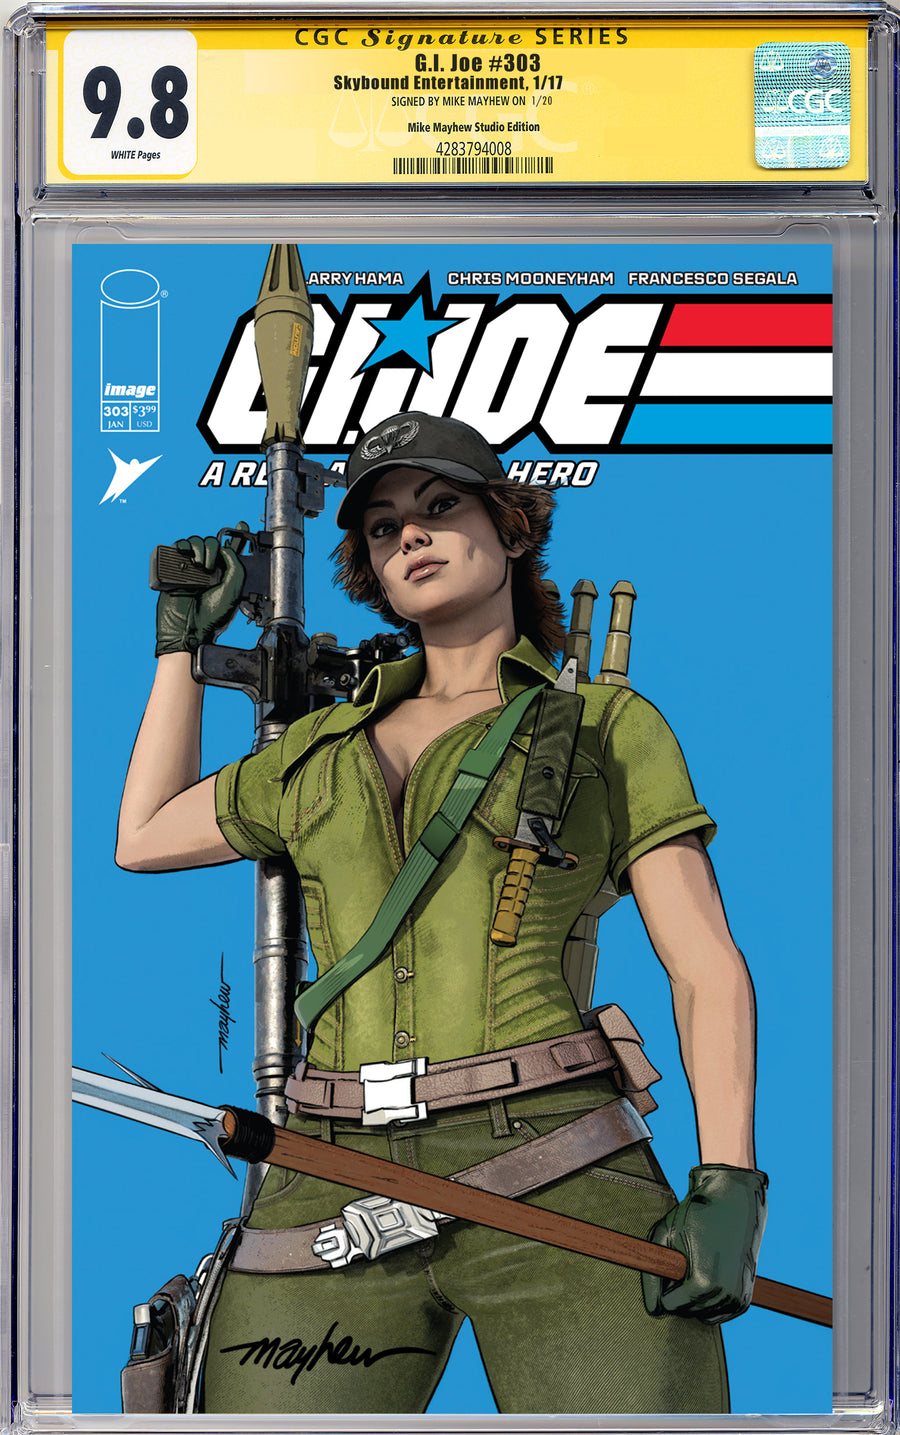 G.I. JOE: A REAL AMERICAN HERO #303  Mike Mayhew Studio Variant Cover A Trade Dress Regular Sig CGC Yellow Label 9.6 and Above Graded Slab